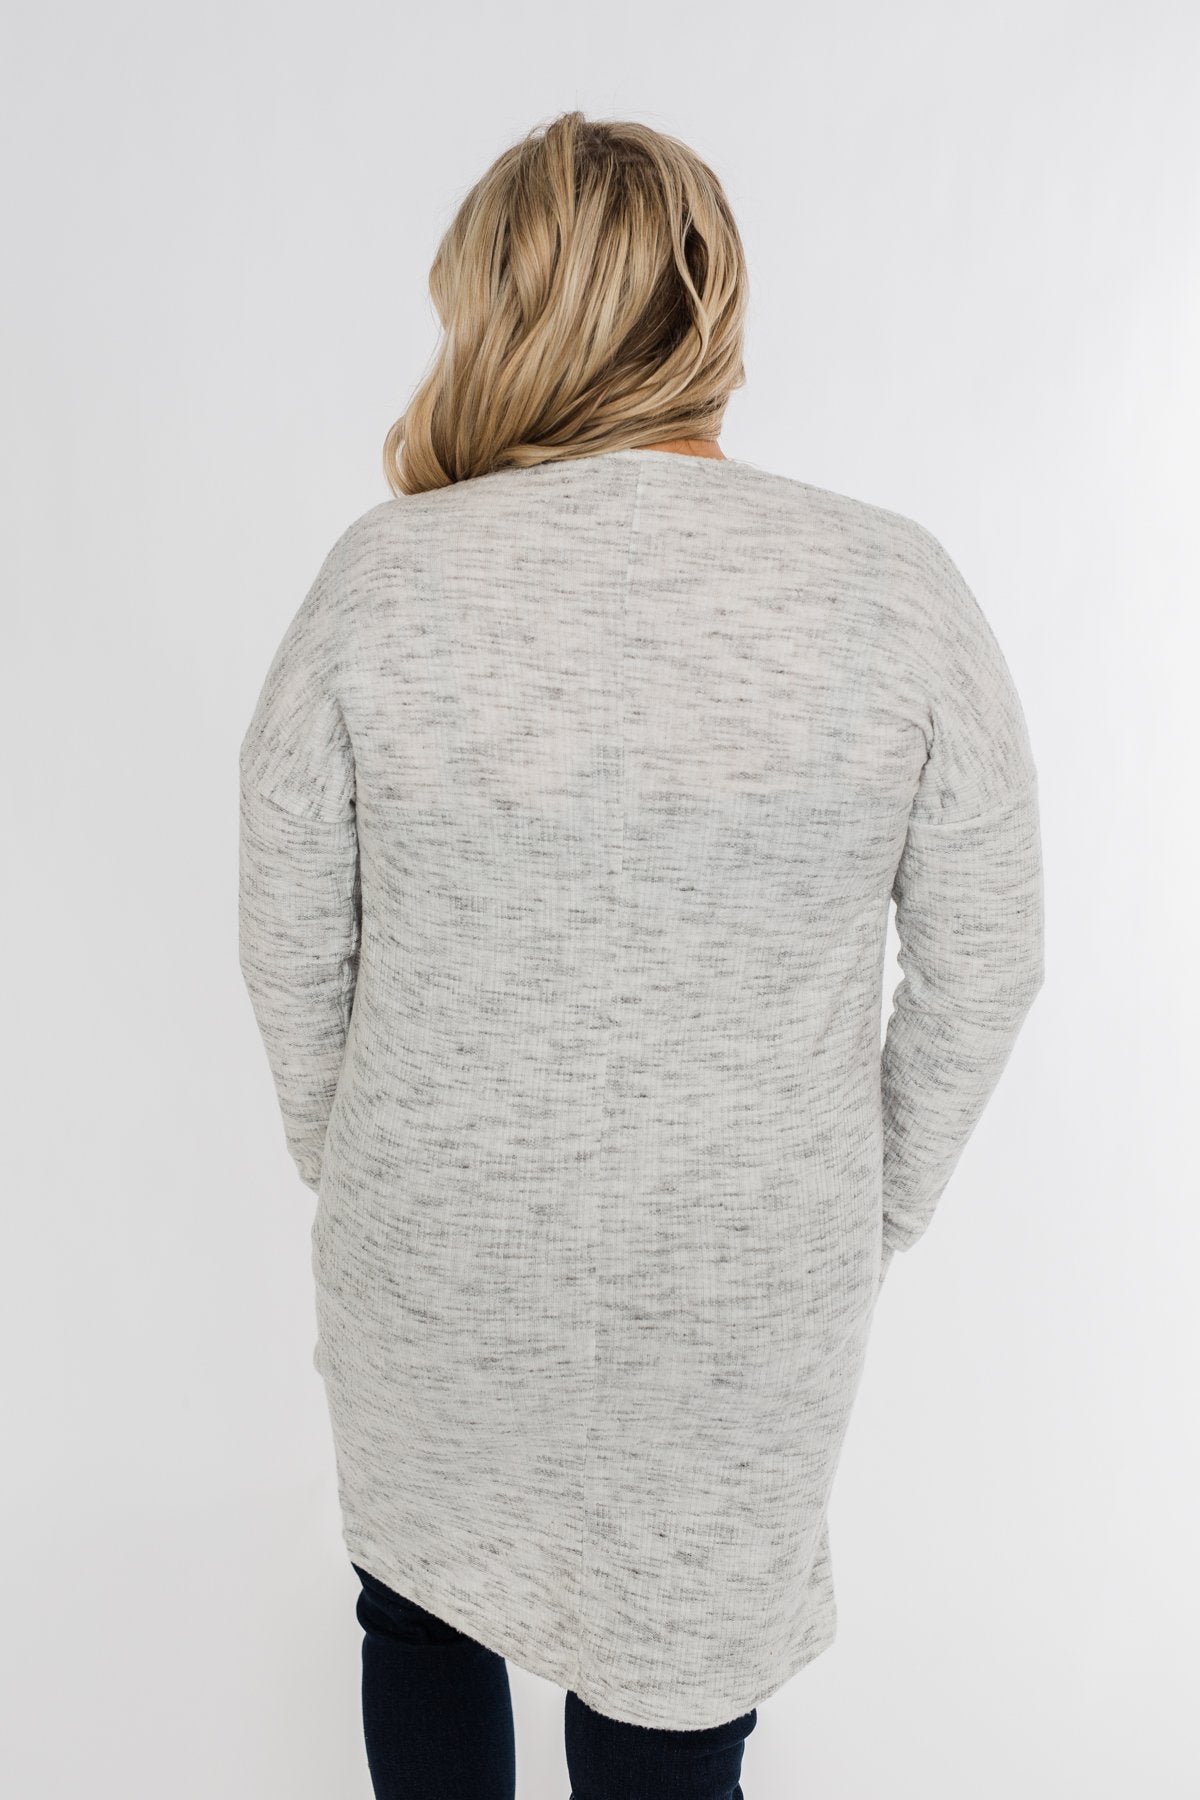 In Sync With You Lightweight Cardigan- Light Heather Grey